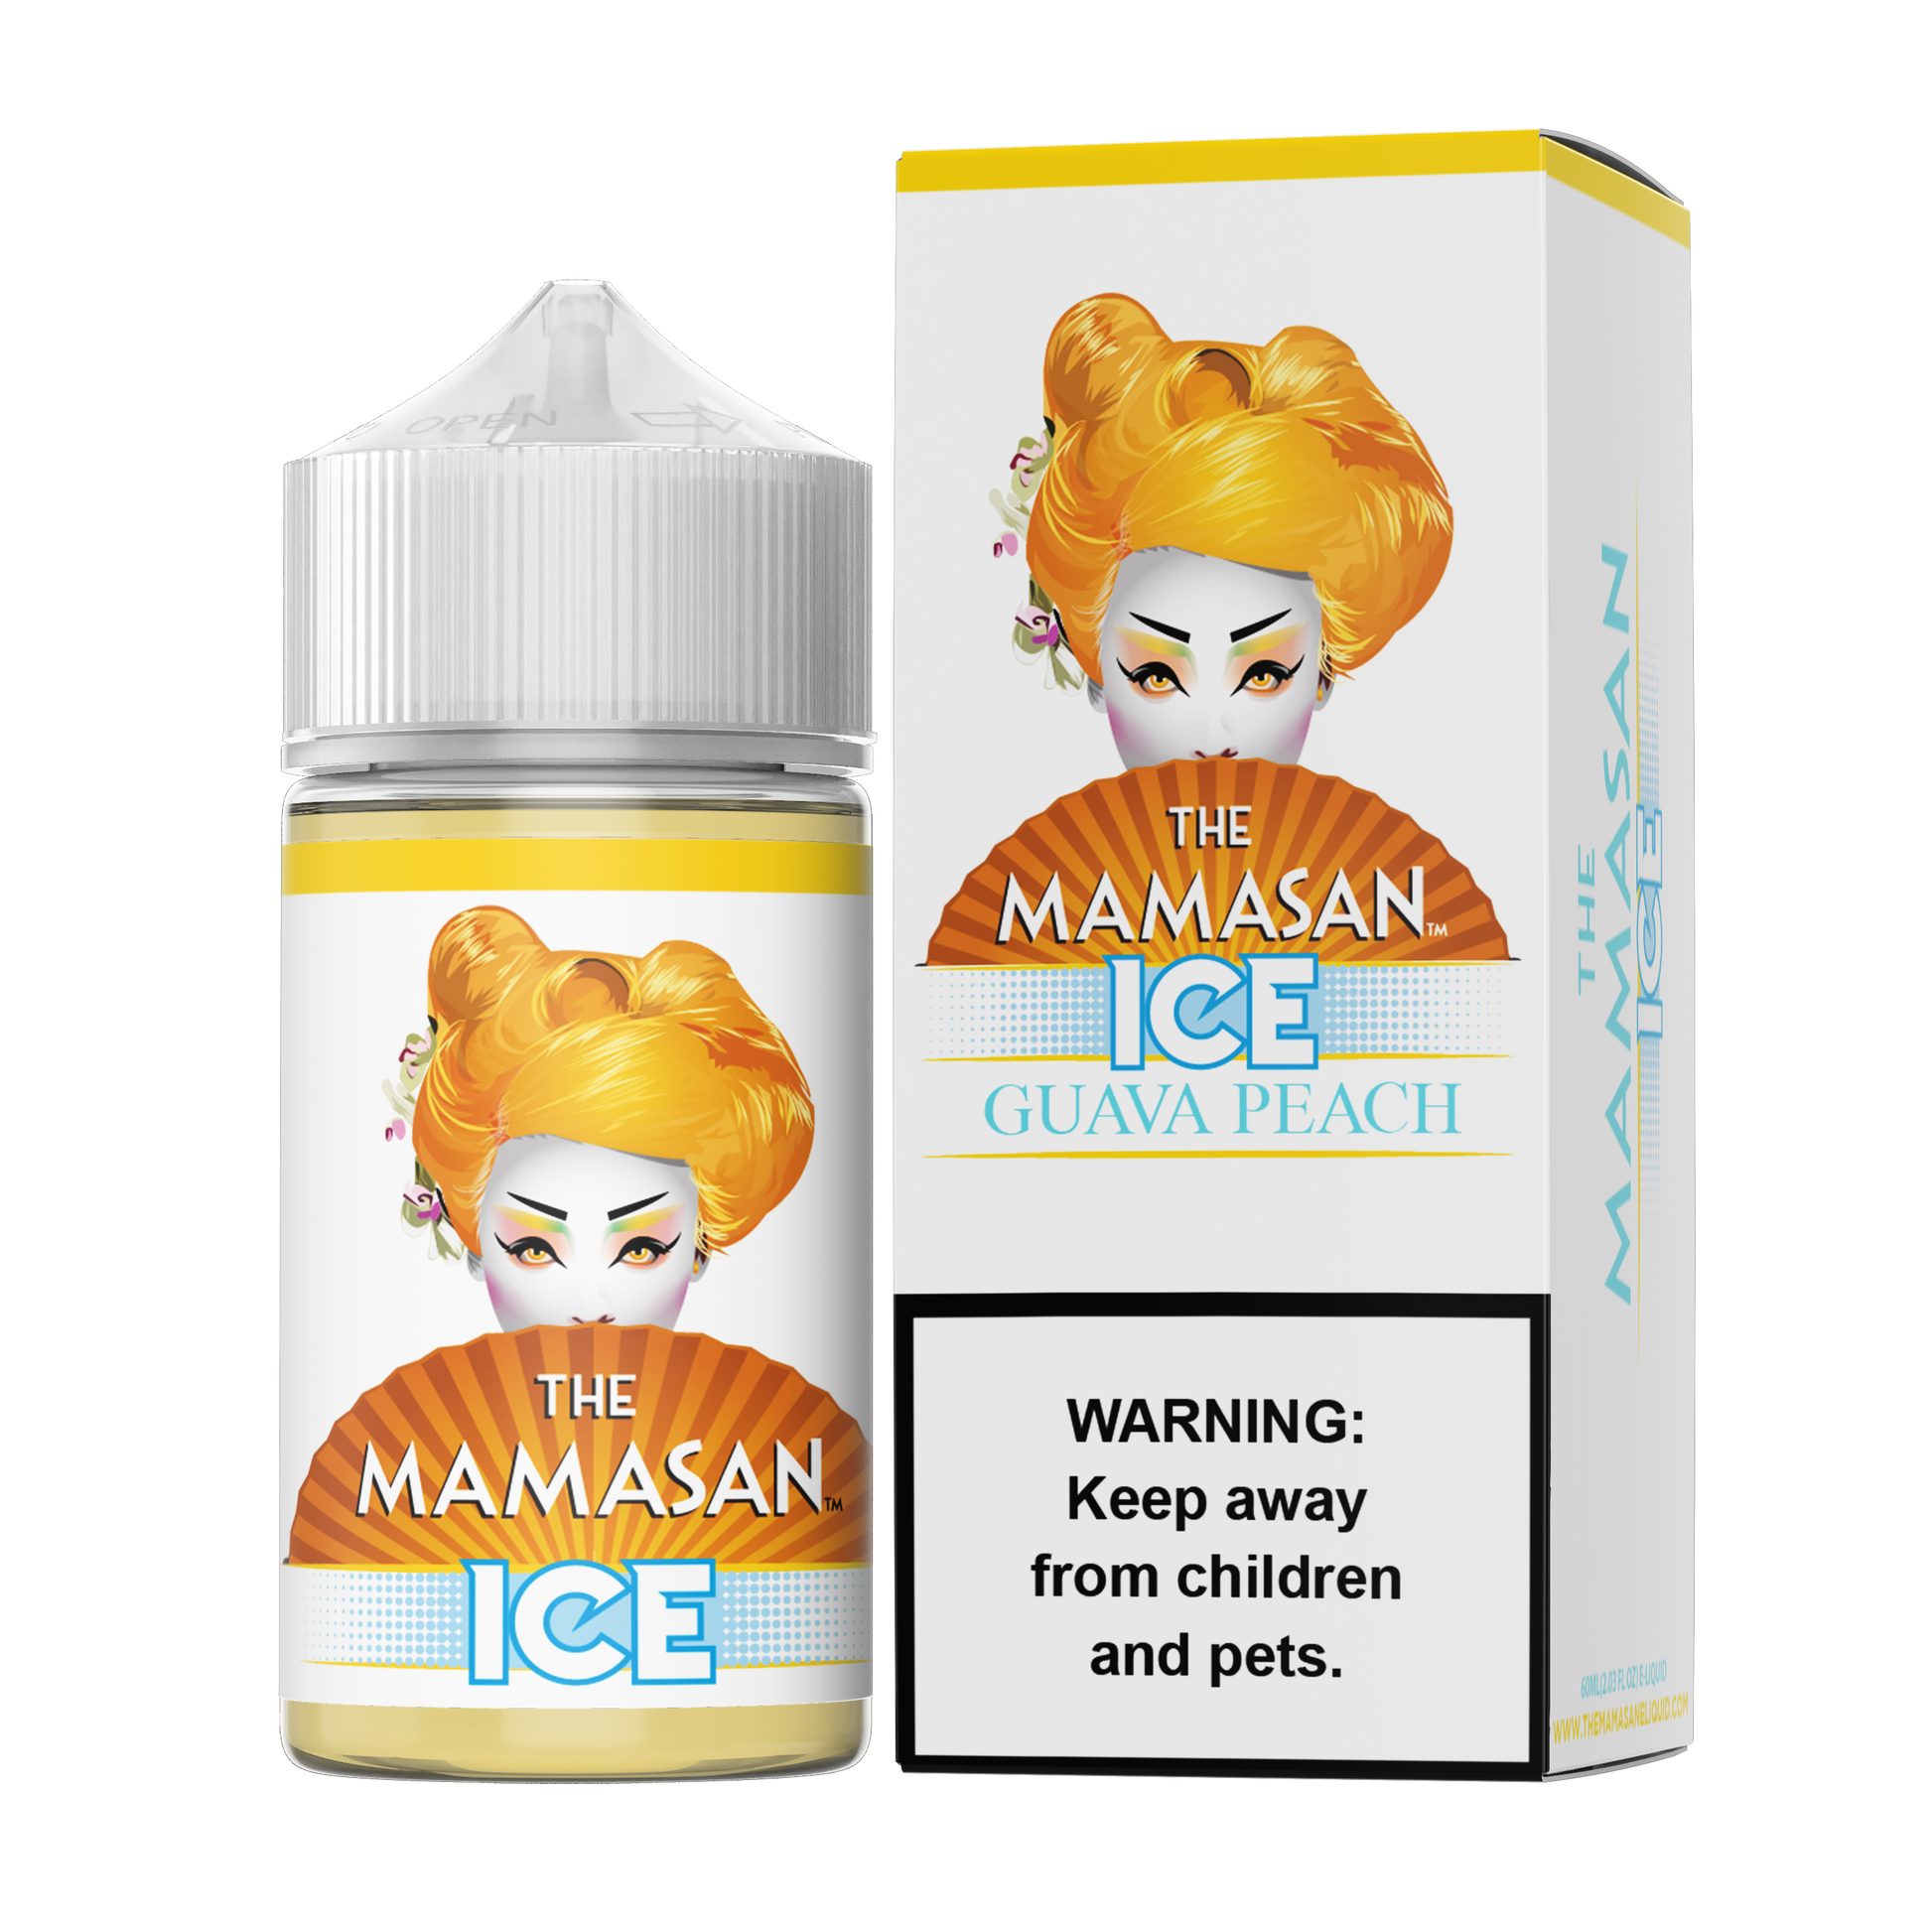 Guava Peach Ice by The Mamasan Series 60mL with Packaging